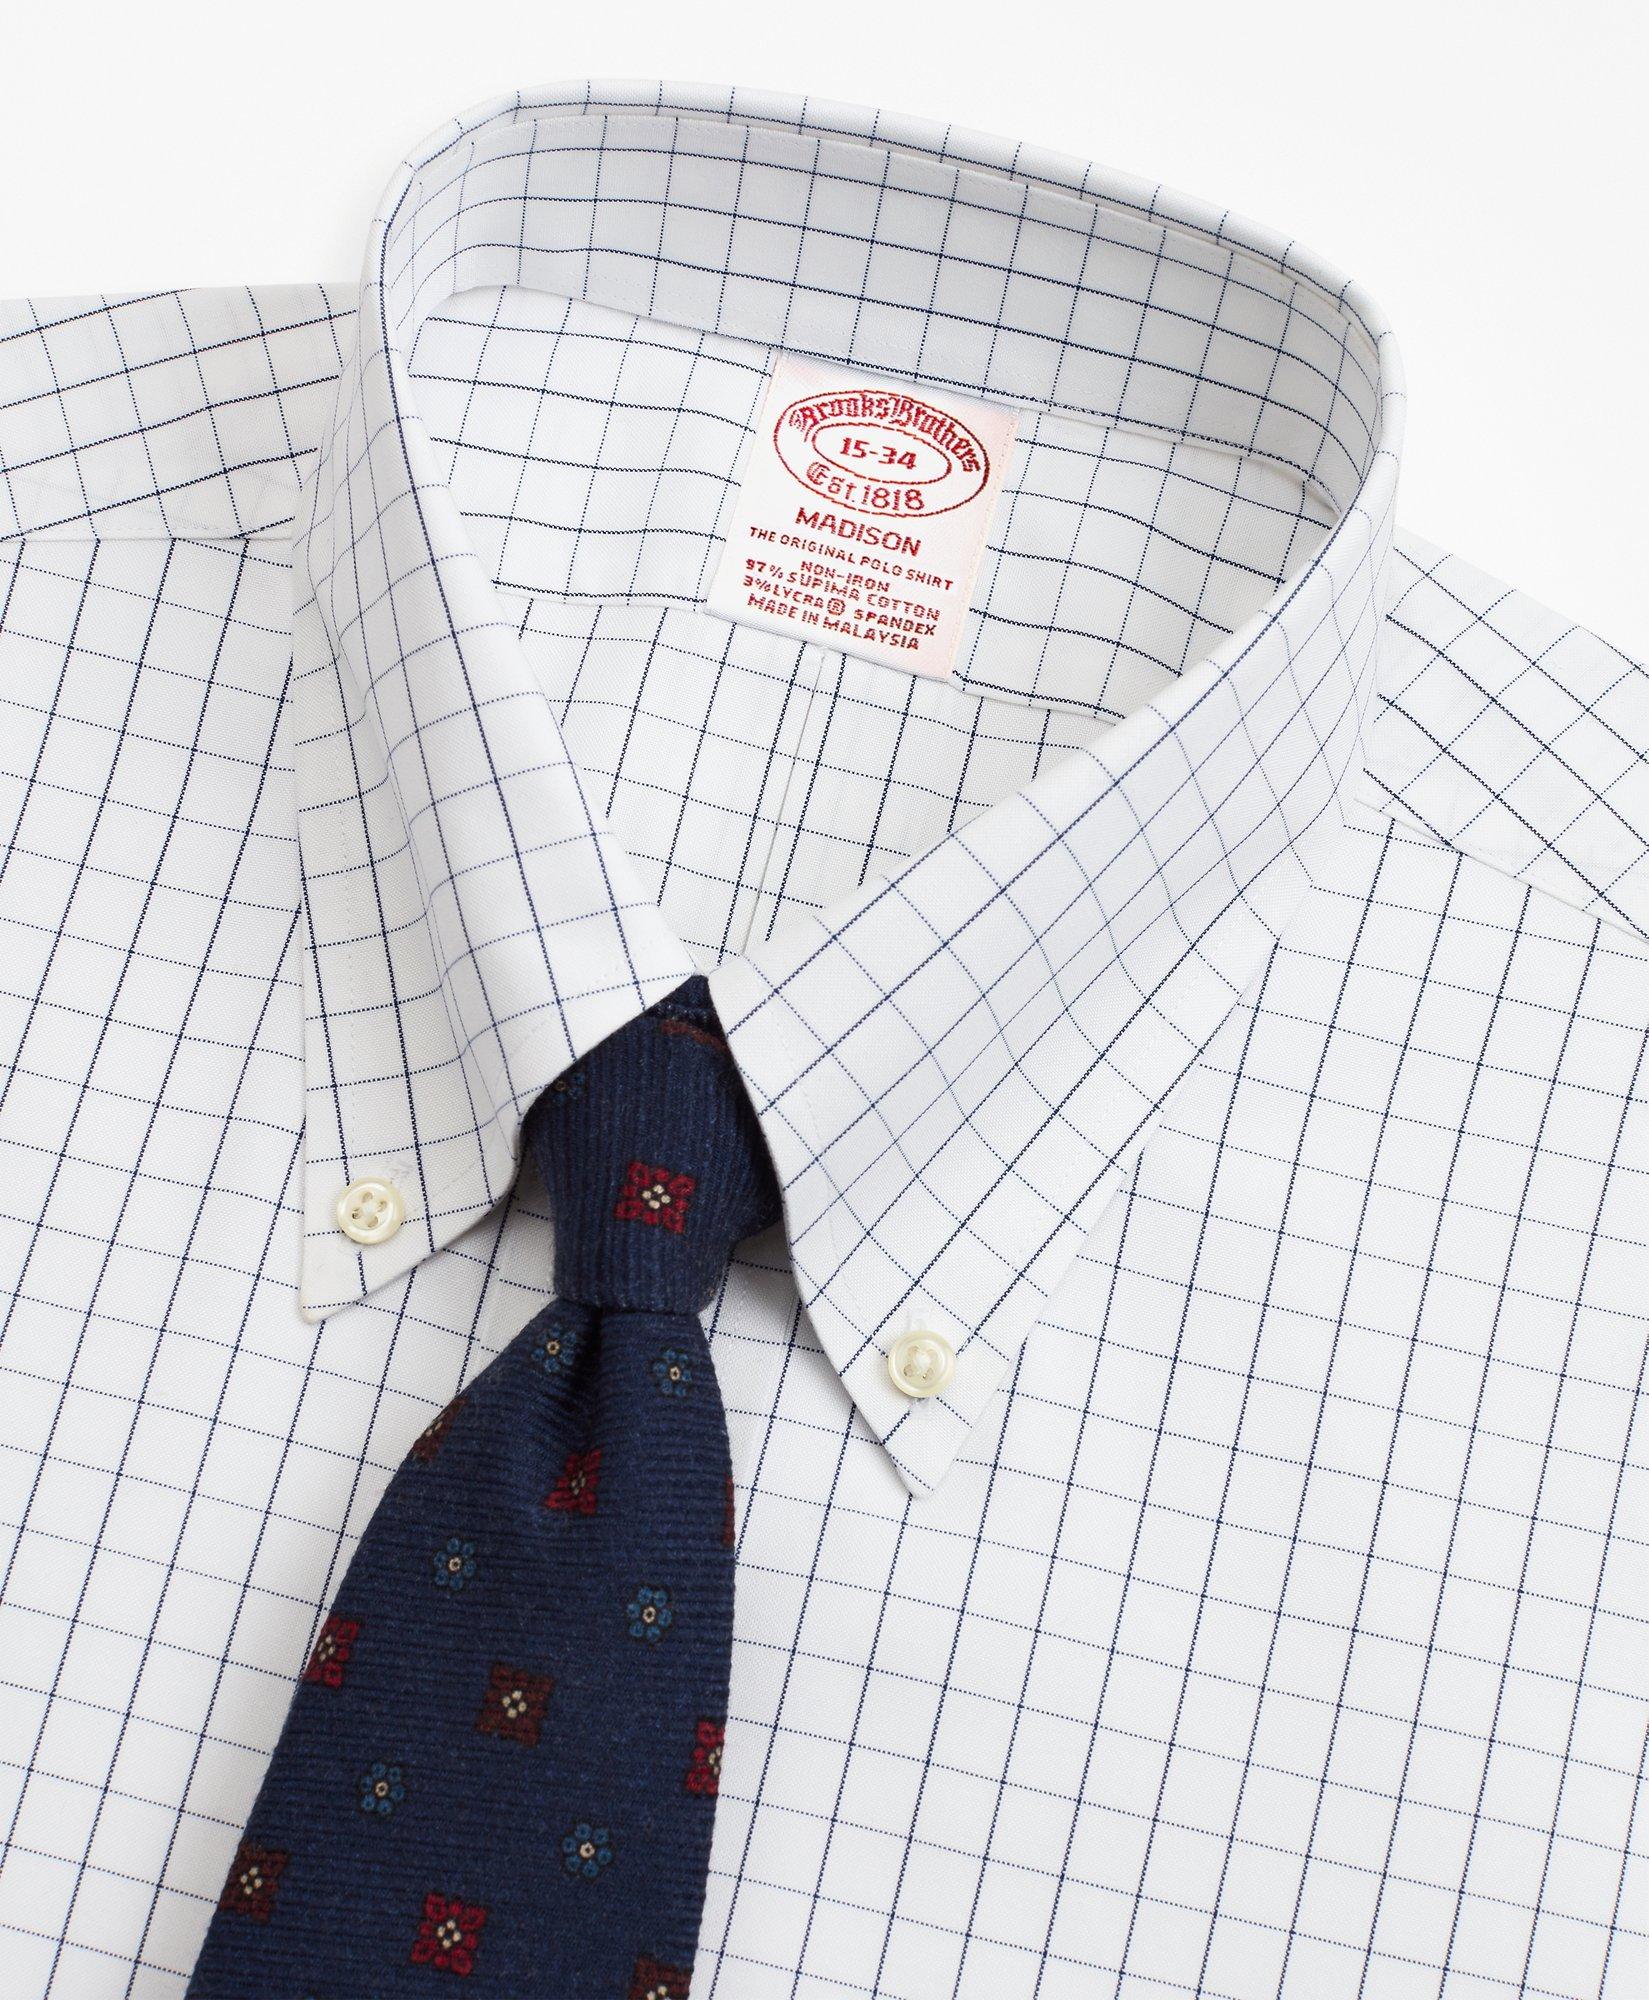 Brooks Brothers: Men’s Dress Shirts which are reduced to $31